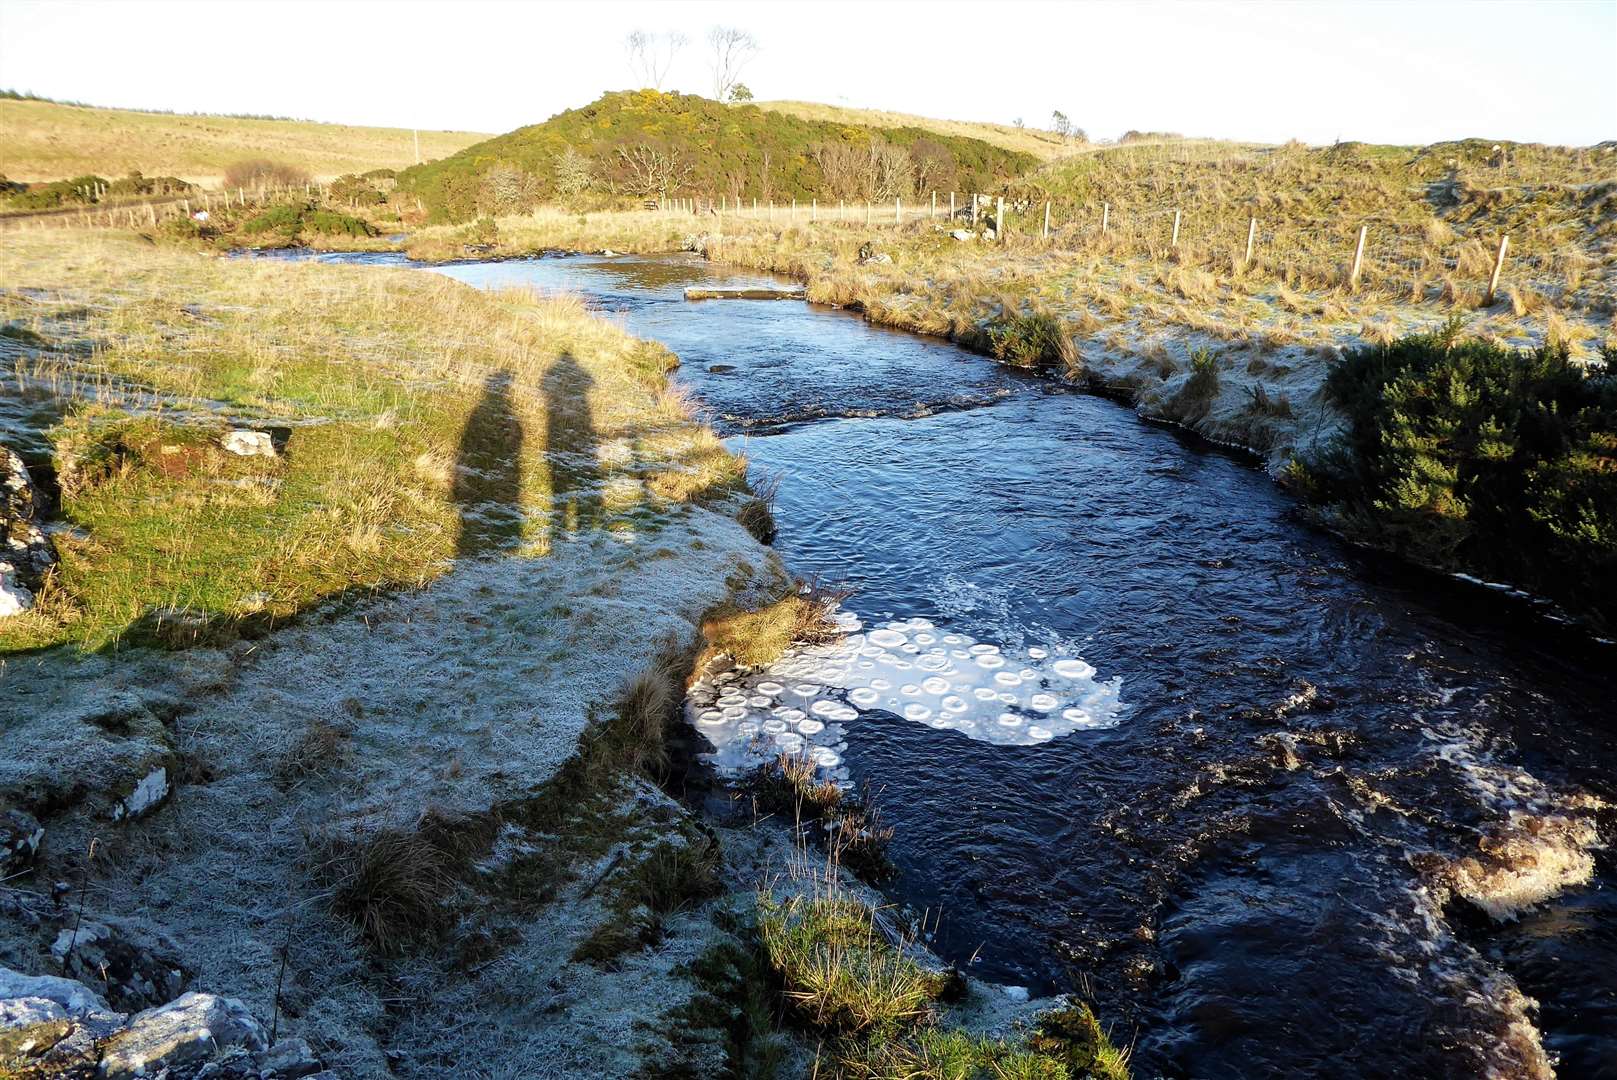 Frozen pancakes at Scouthal Burn.  Cuckoo Hill is in the background and the remains of an old monastery and graveyard known as the Clow Chapel are on the right side.